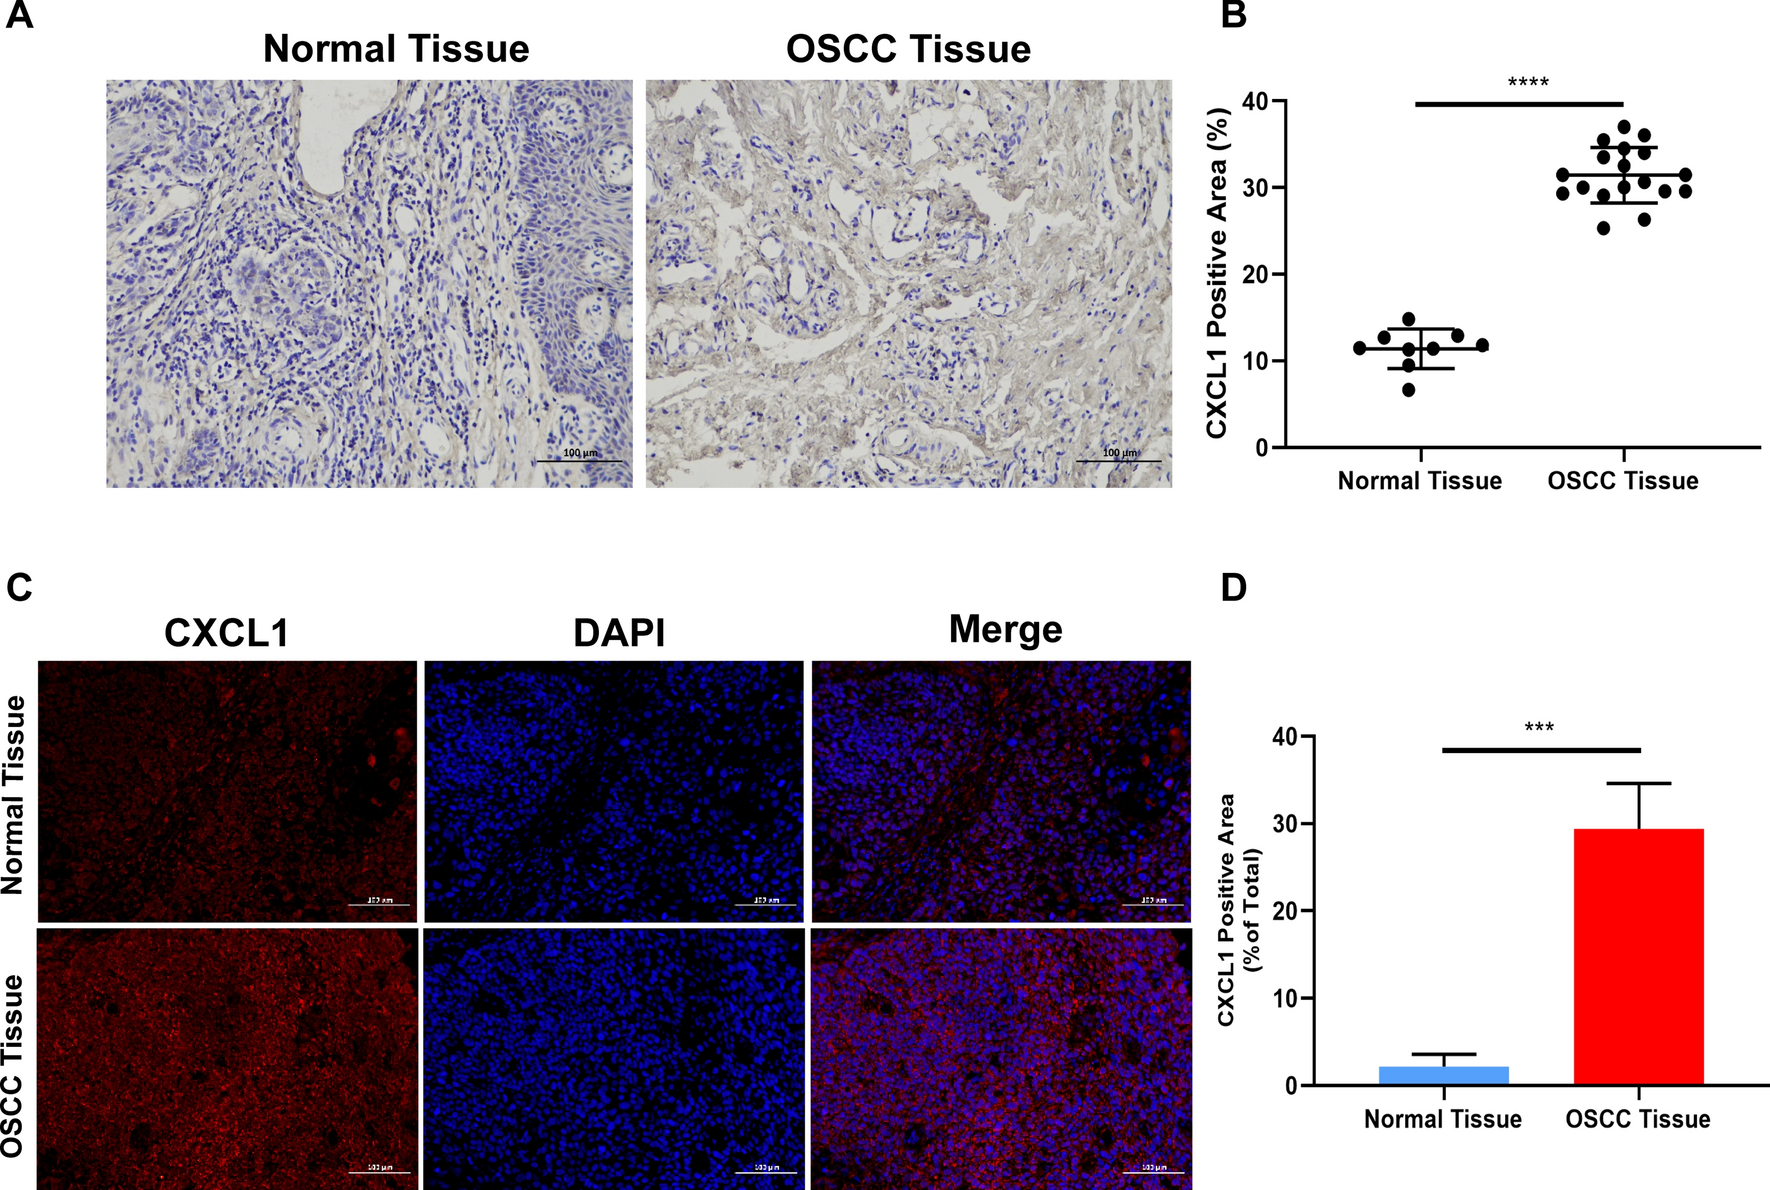 Crosstalk between cancer cells and macrophages promotes OSCC cell migration and invasion through a CXCL1/EGF positive feedback loop